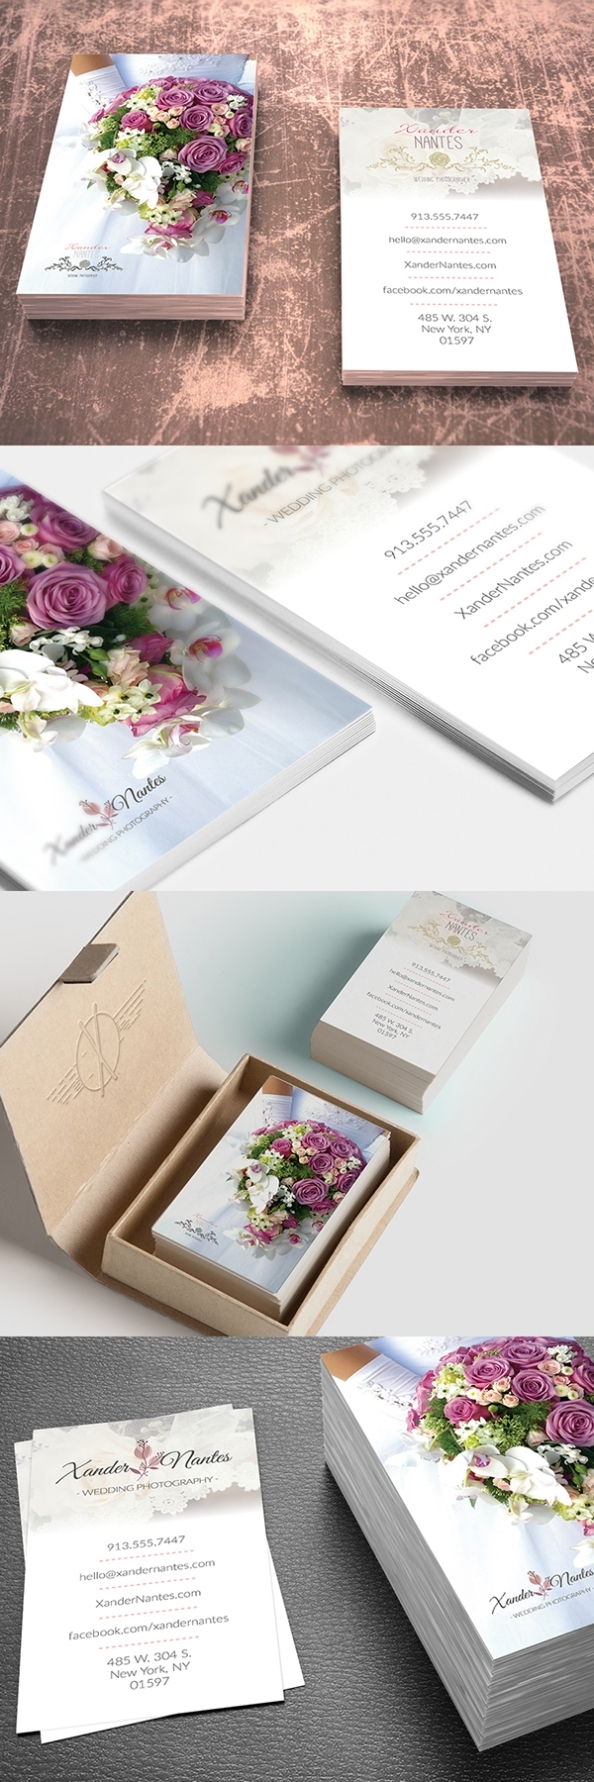 Wedding Photographer Business Card Photoshop Template On Behance Intended For Photography Business Card Template Photoshop